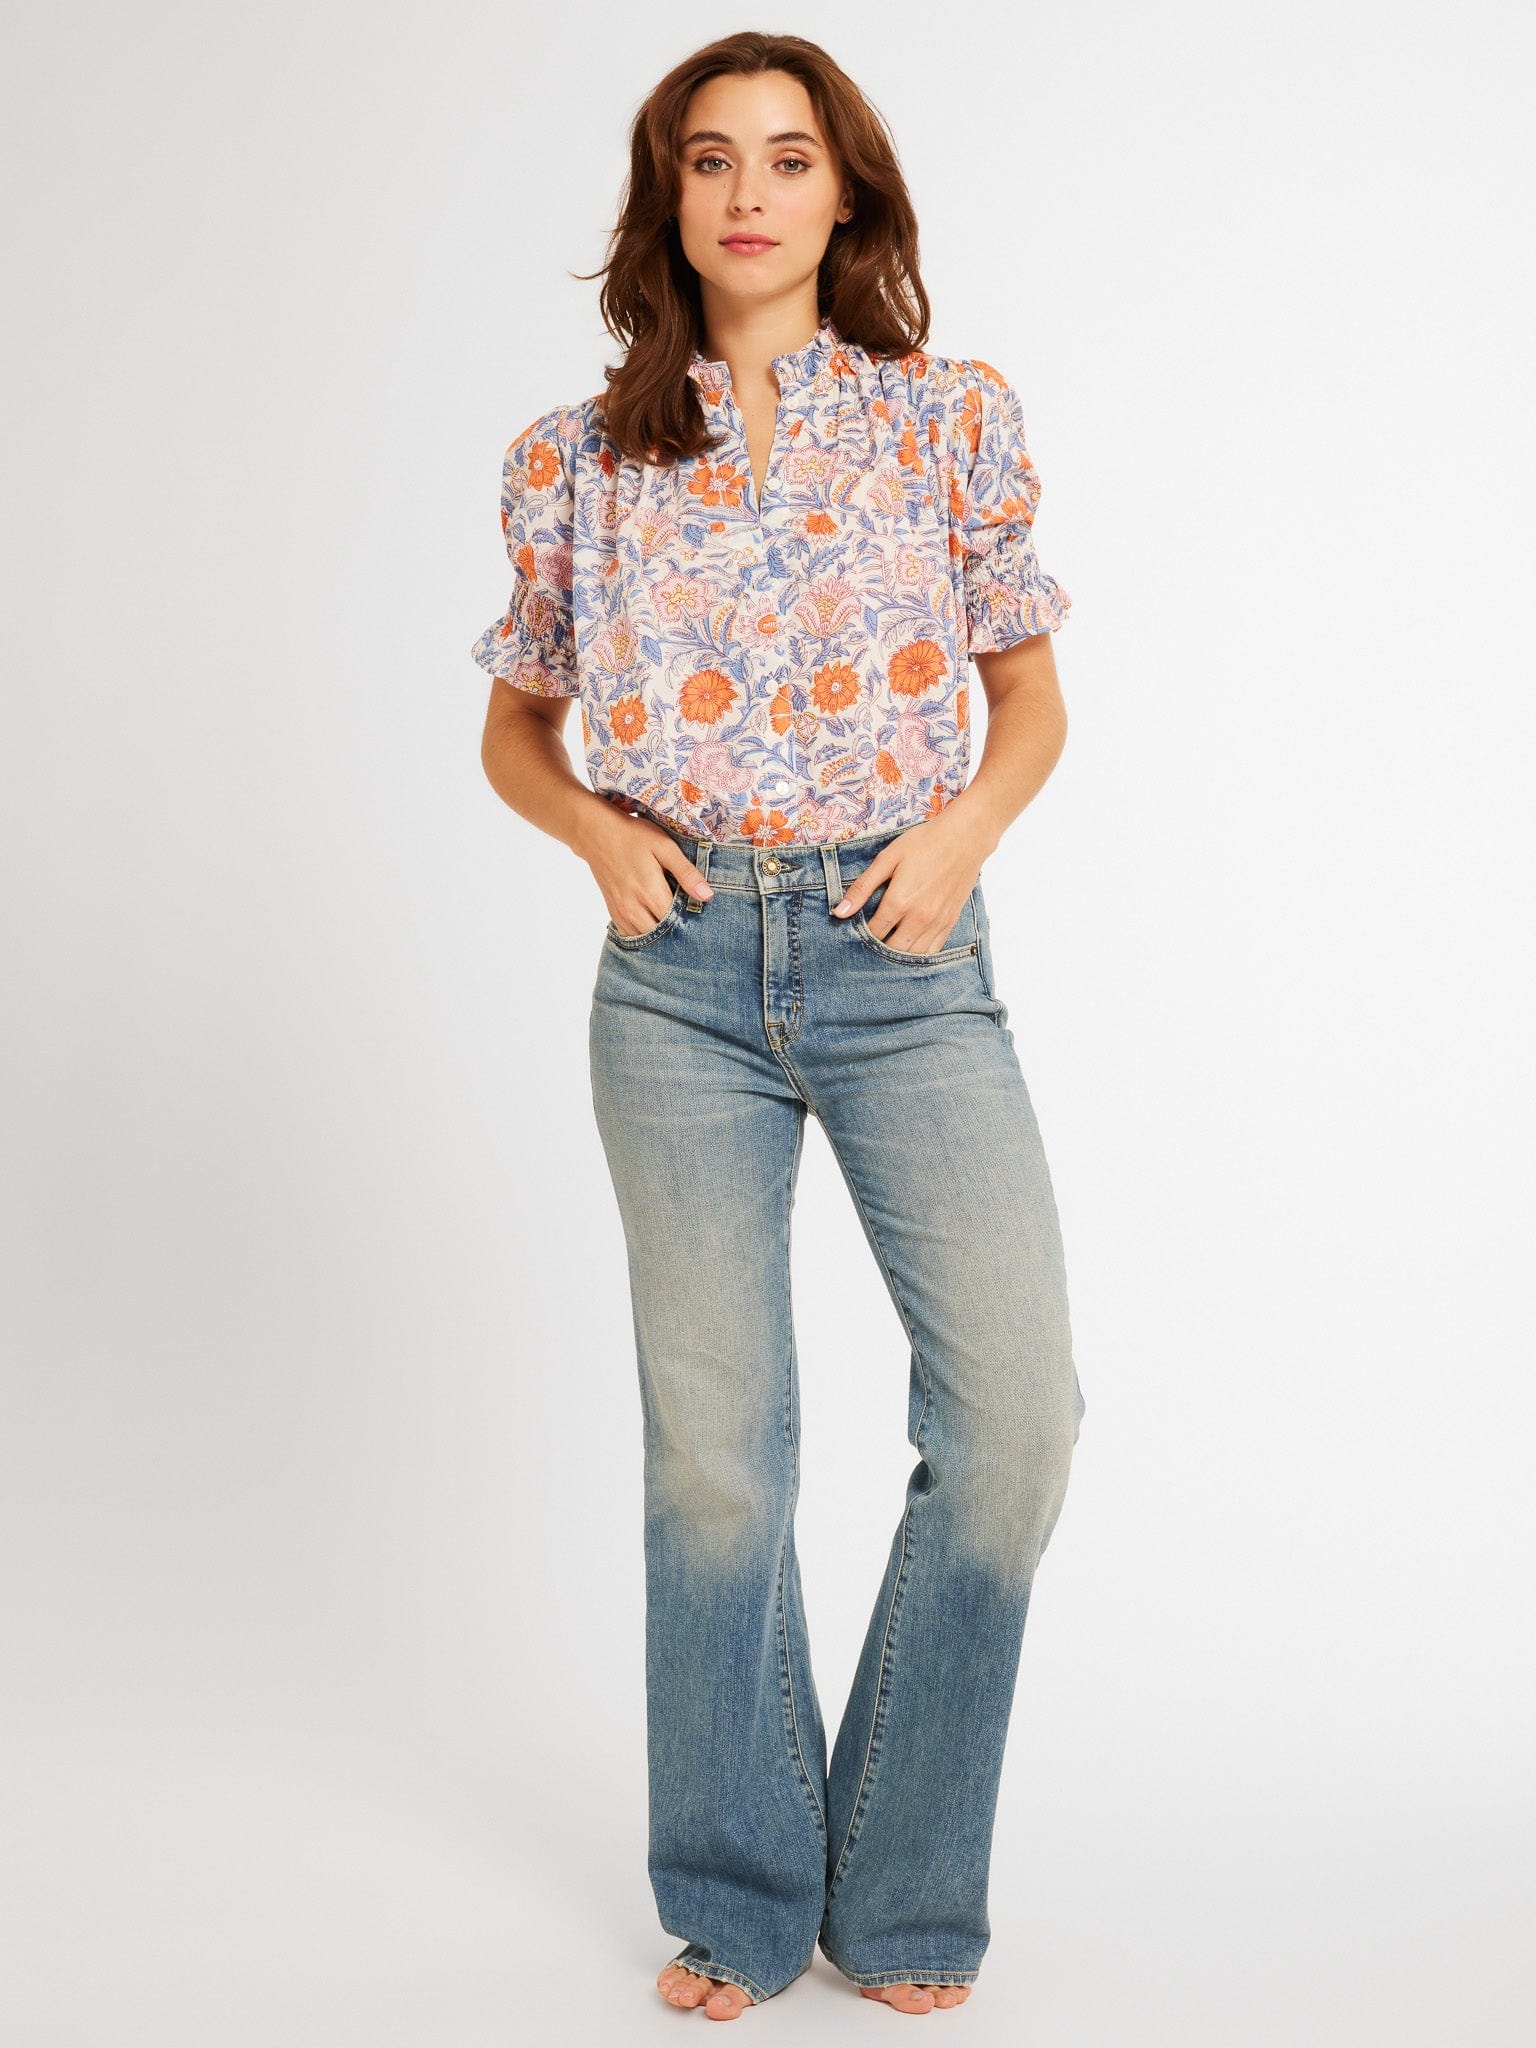 Marnie Top in Newport Floral – MILLE